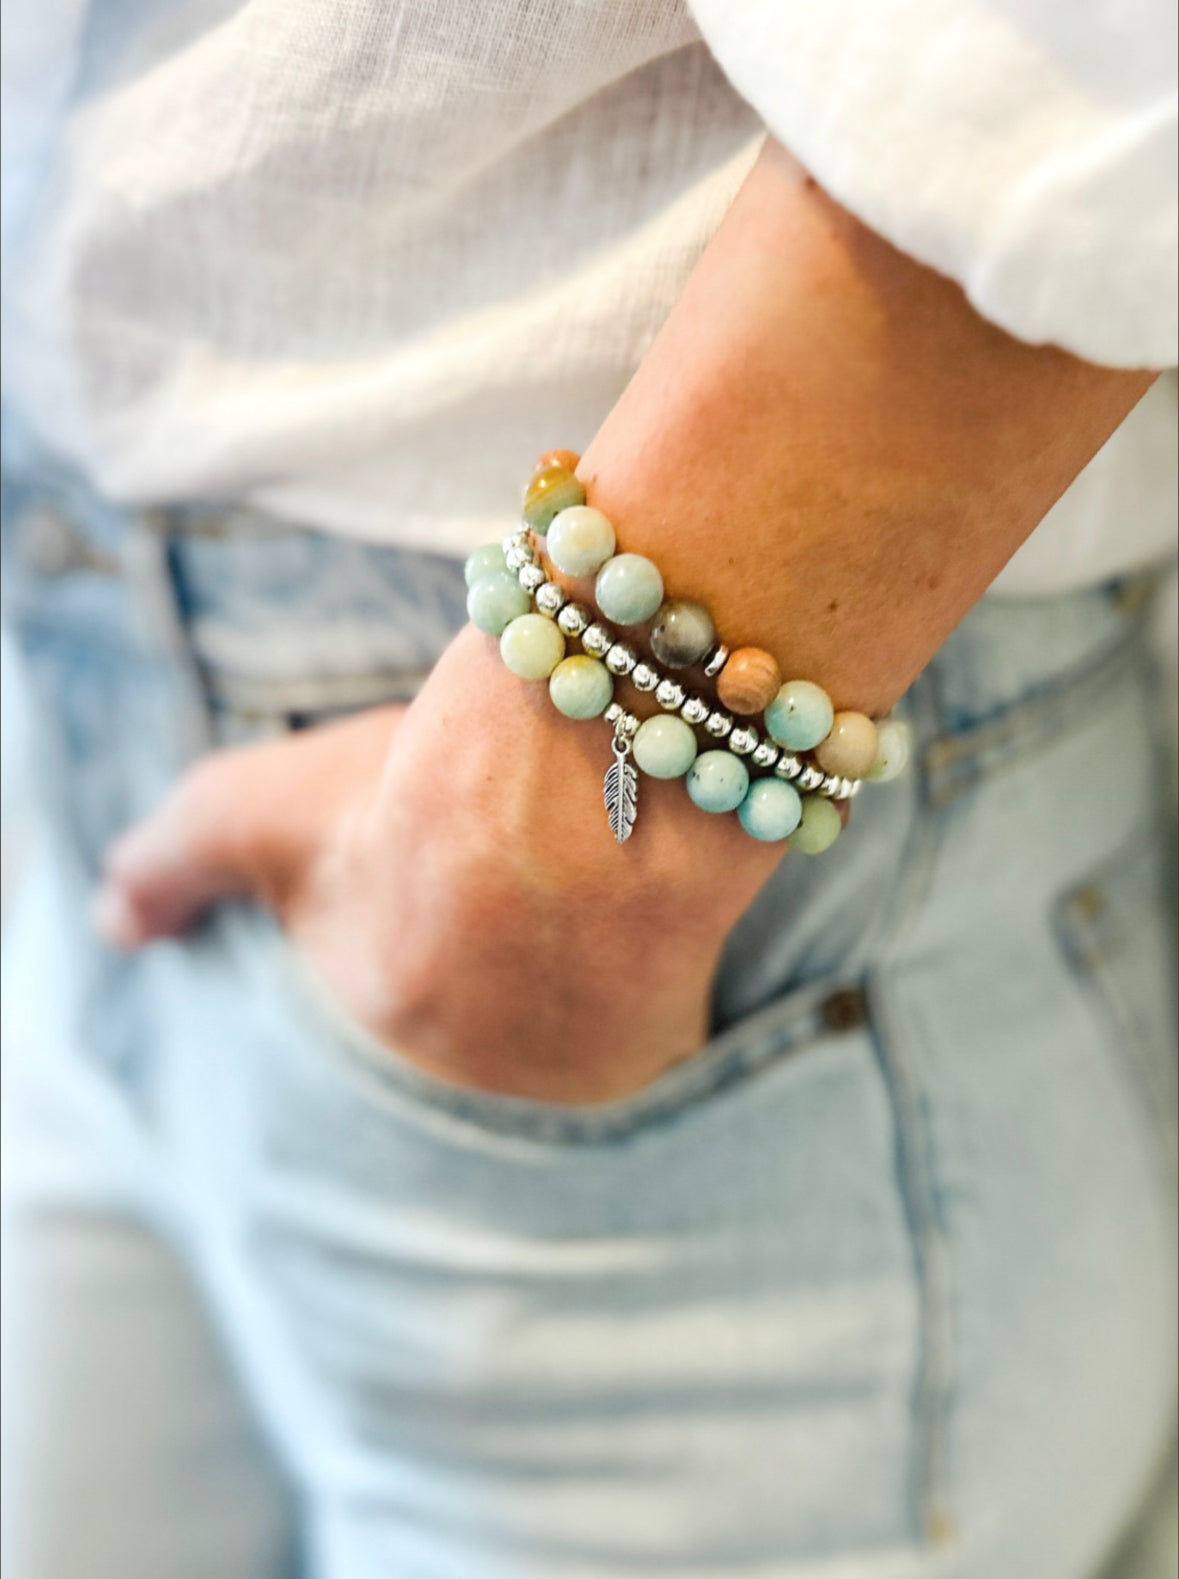 This healing gemstone bracelet stack is crafted with natural Amazonite beads and  feather charm.   Amazonite is known for its soothing energy, promoting calm and tranquility, and is believed to help balance the emotions, reduce stress and anxiety, and enhance communication. Amazonite brings clarity, balance and insight and is soothing to the nerves.